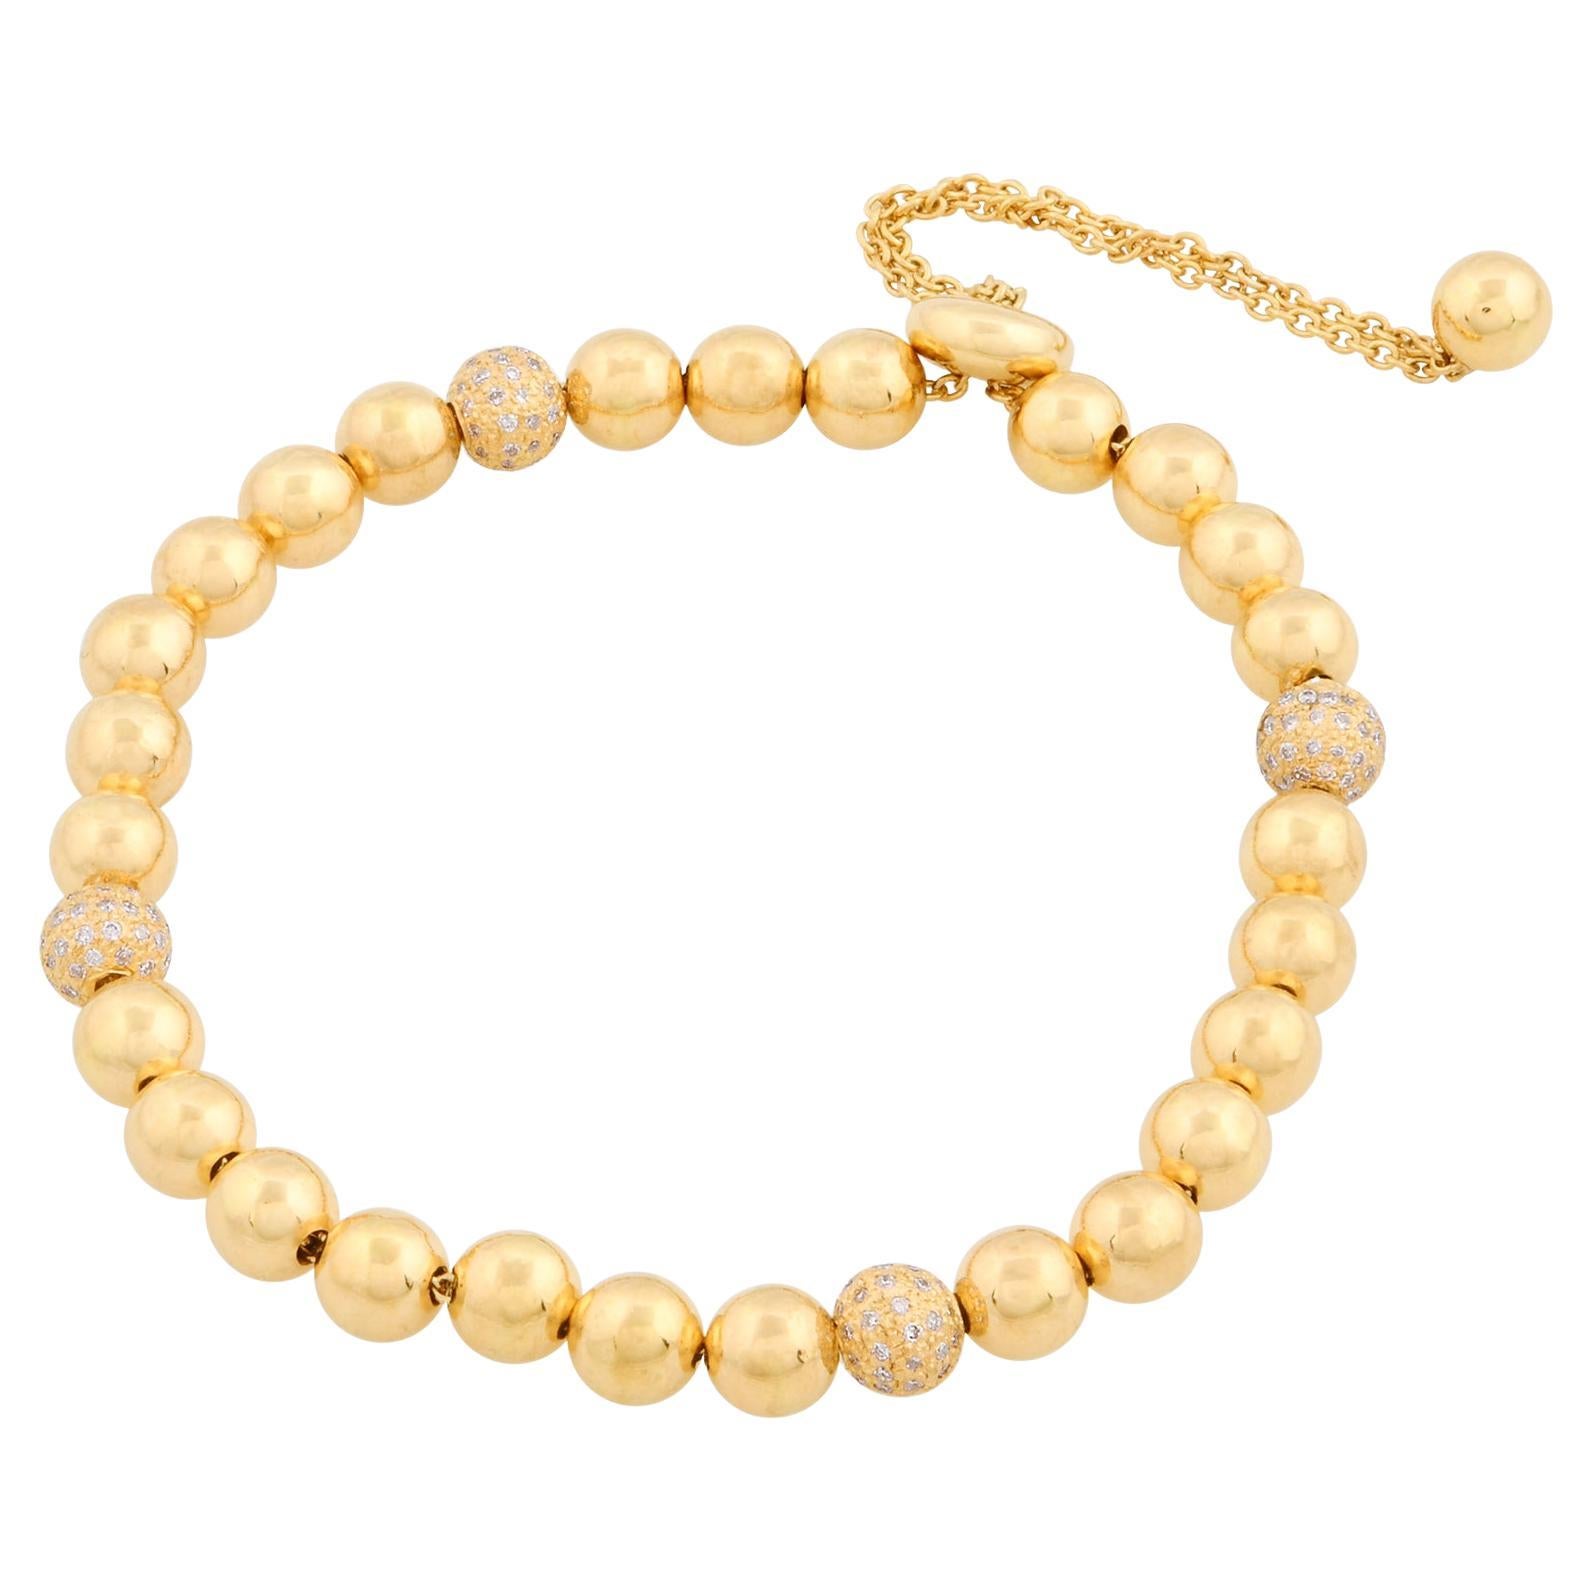 Nature SI Clarity HI Color Diamond Fine Beaded Ball and Ball Bracelet 22k Yellow Gold